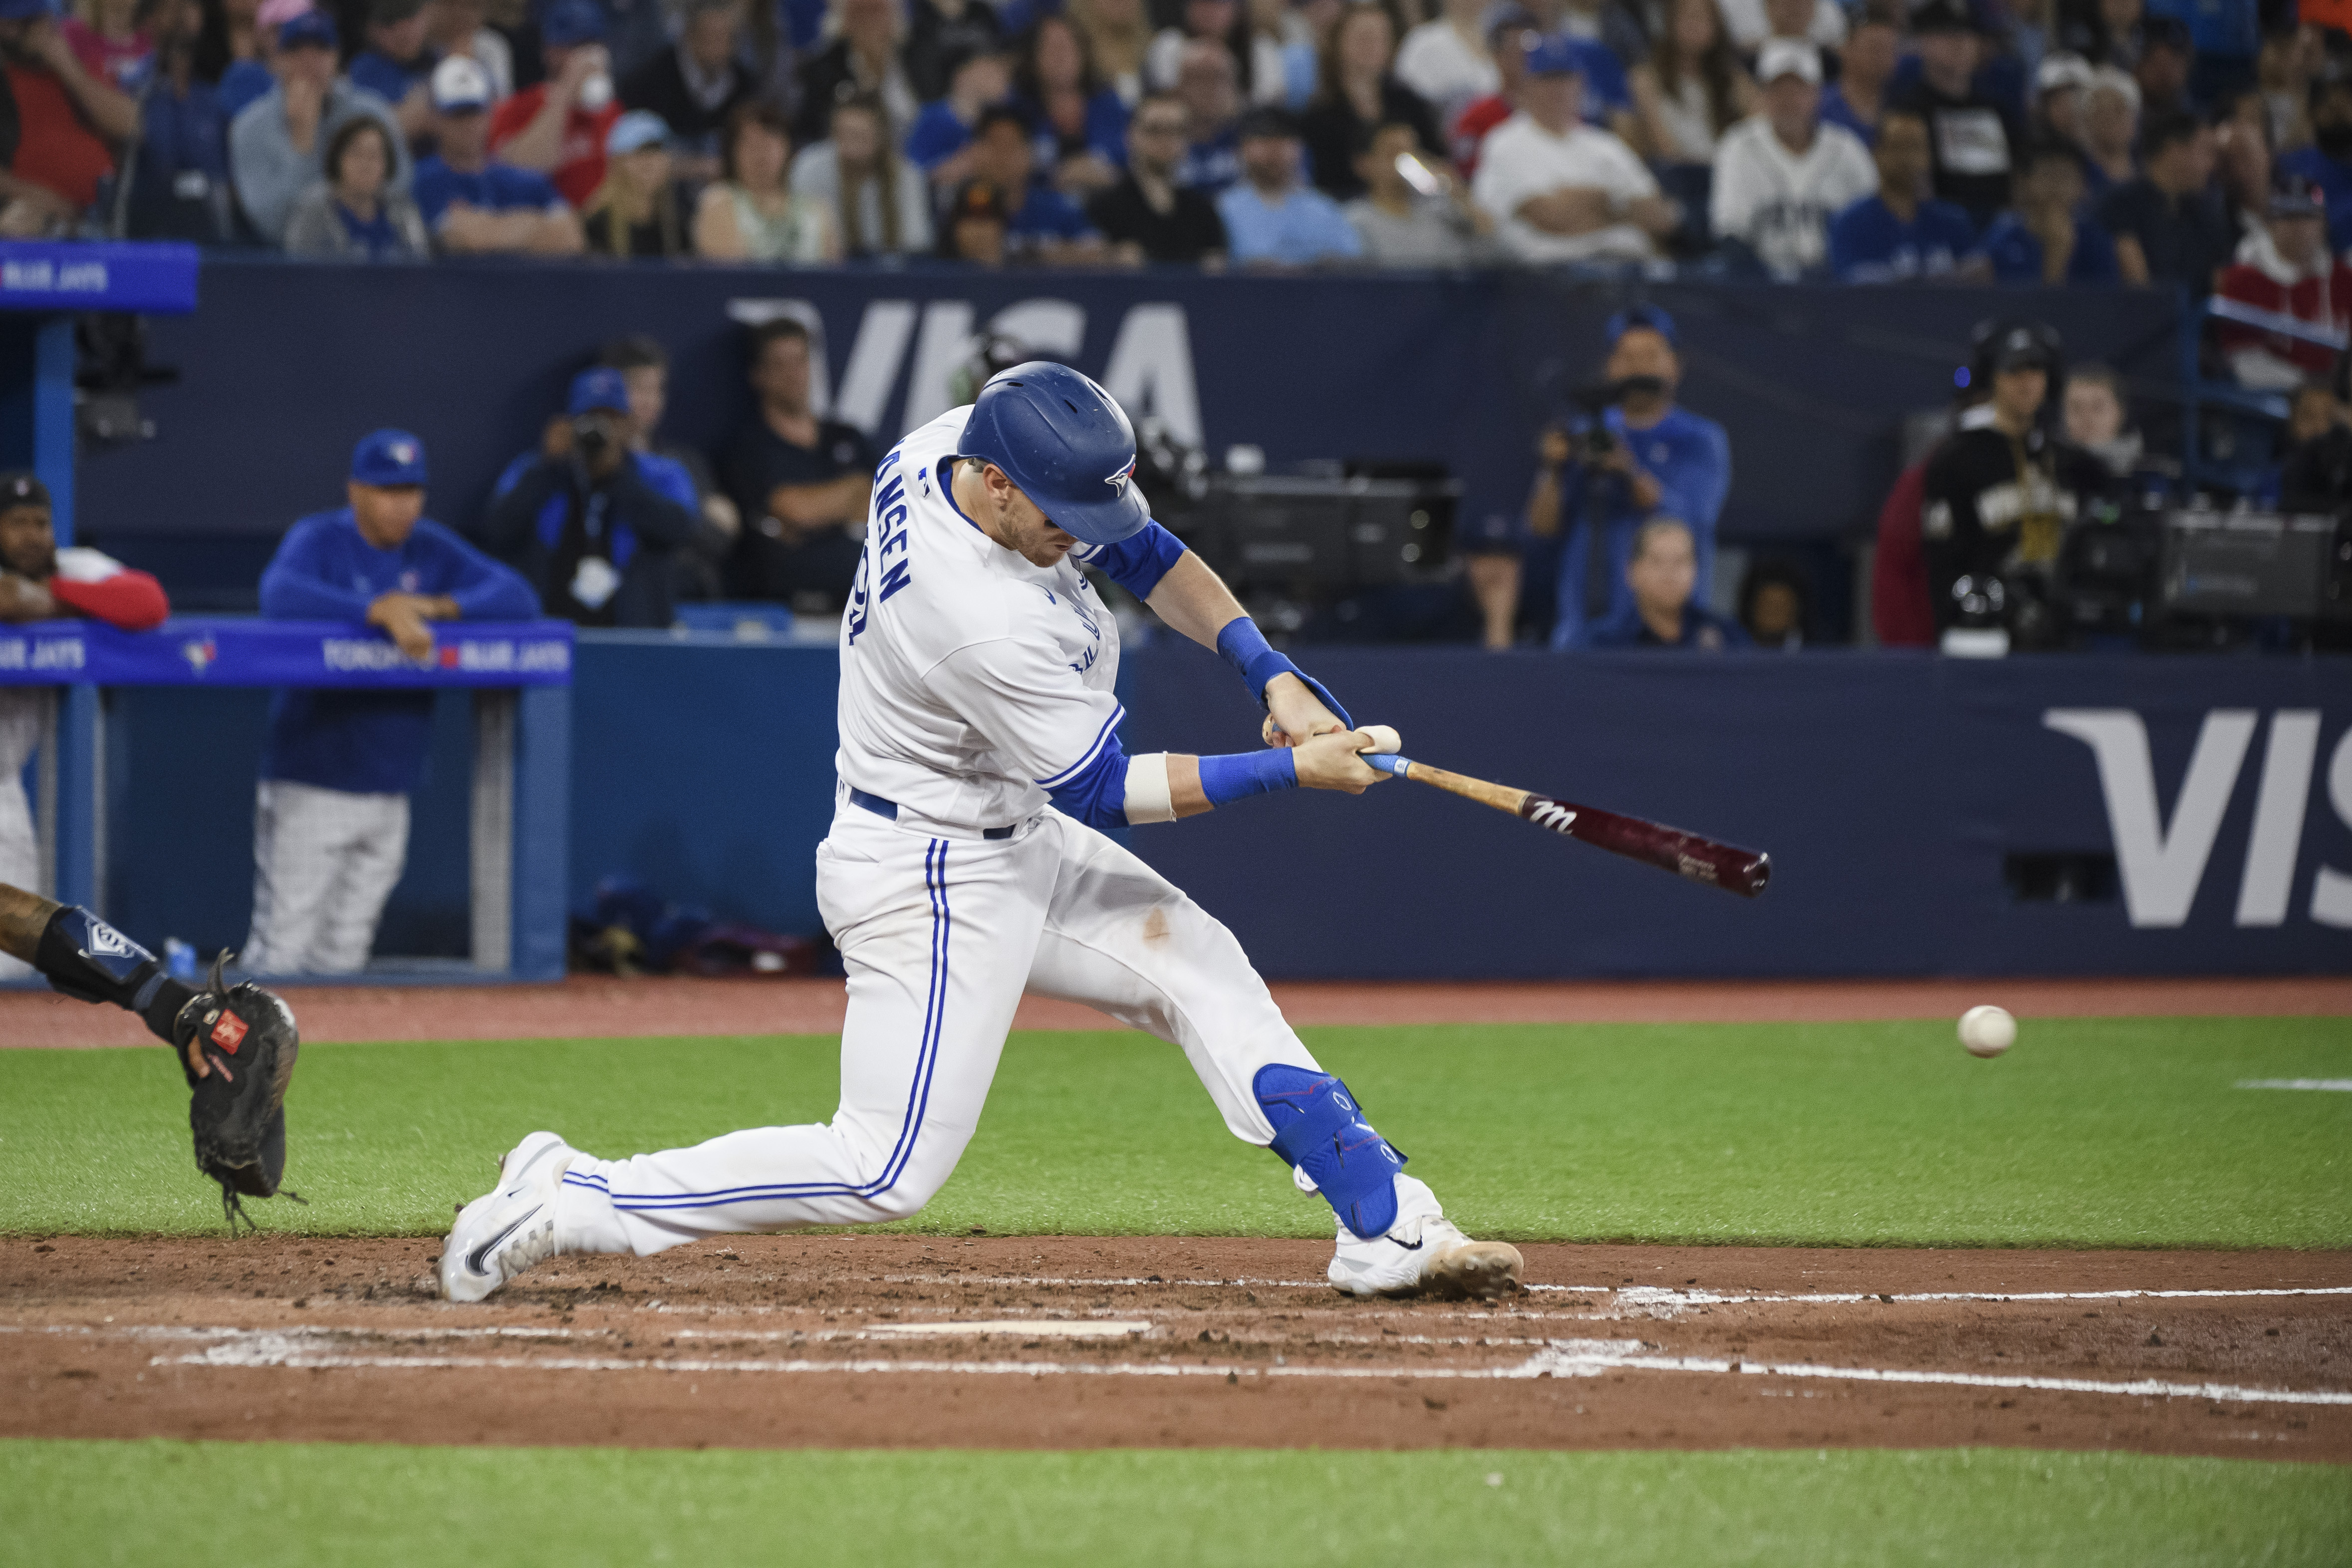 Rays lose first game after 13-0 start, fall 6-3 to Blue Jays